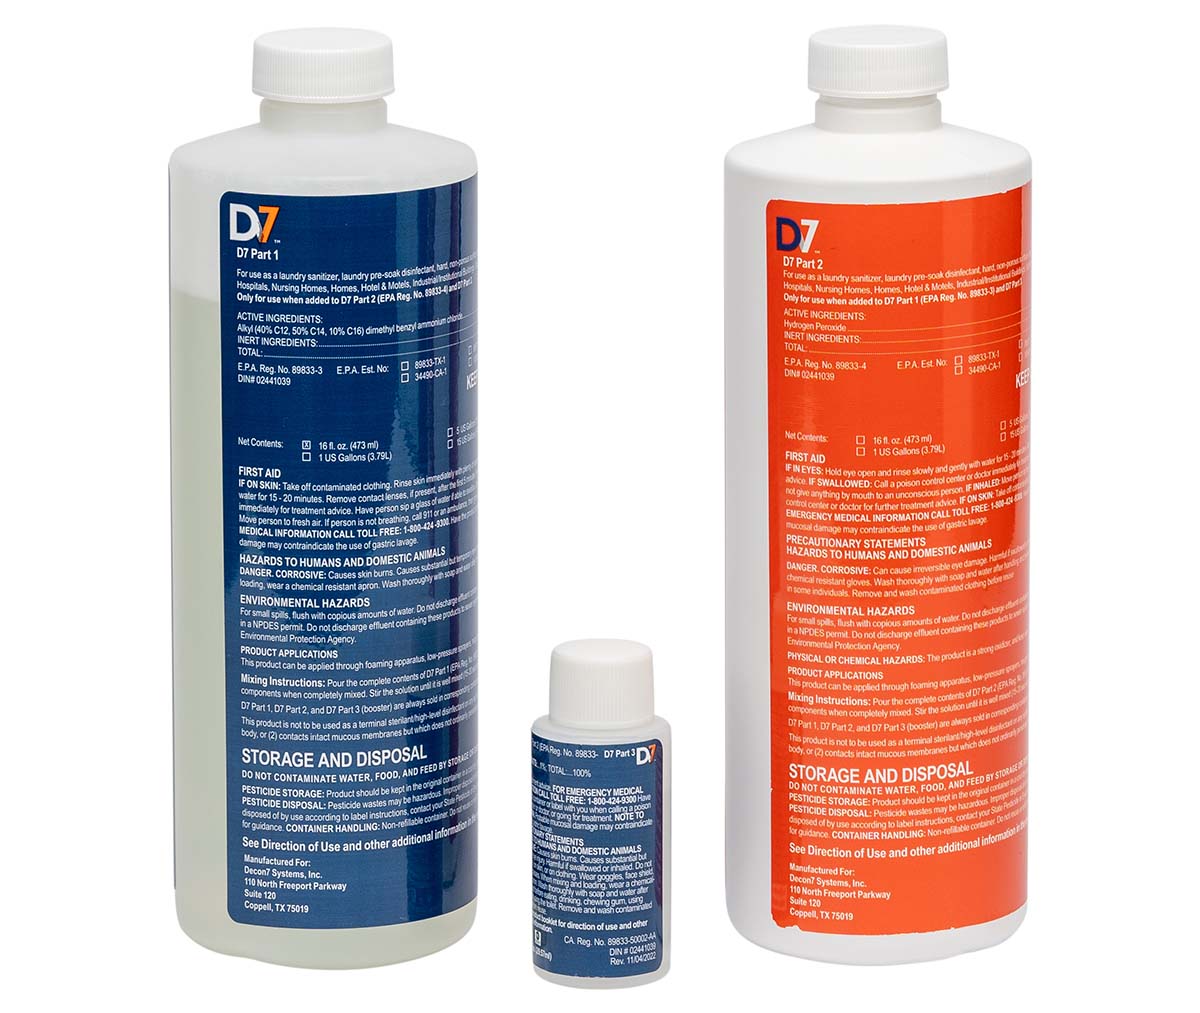 D7 Disinfectant and Deodorizer.